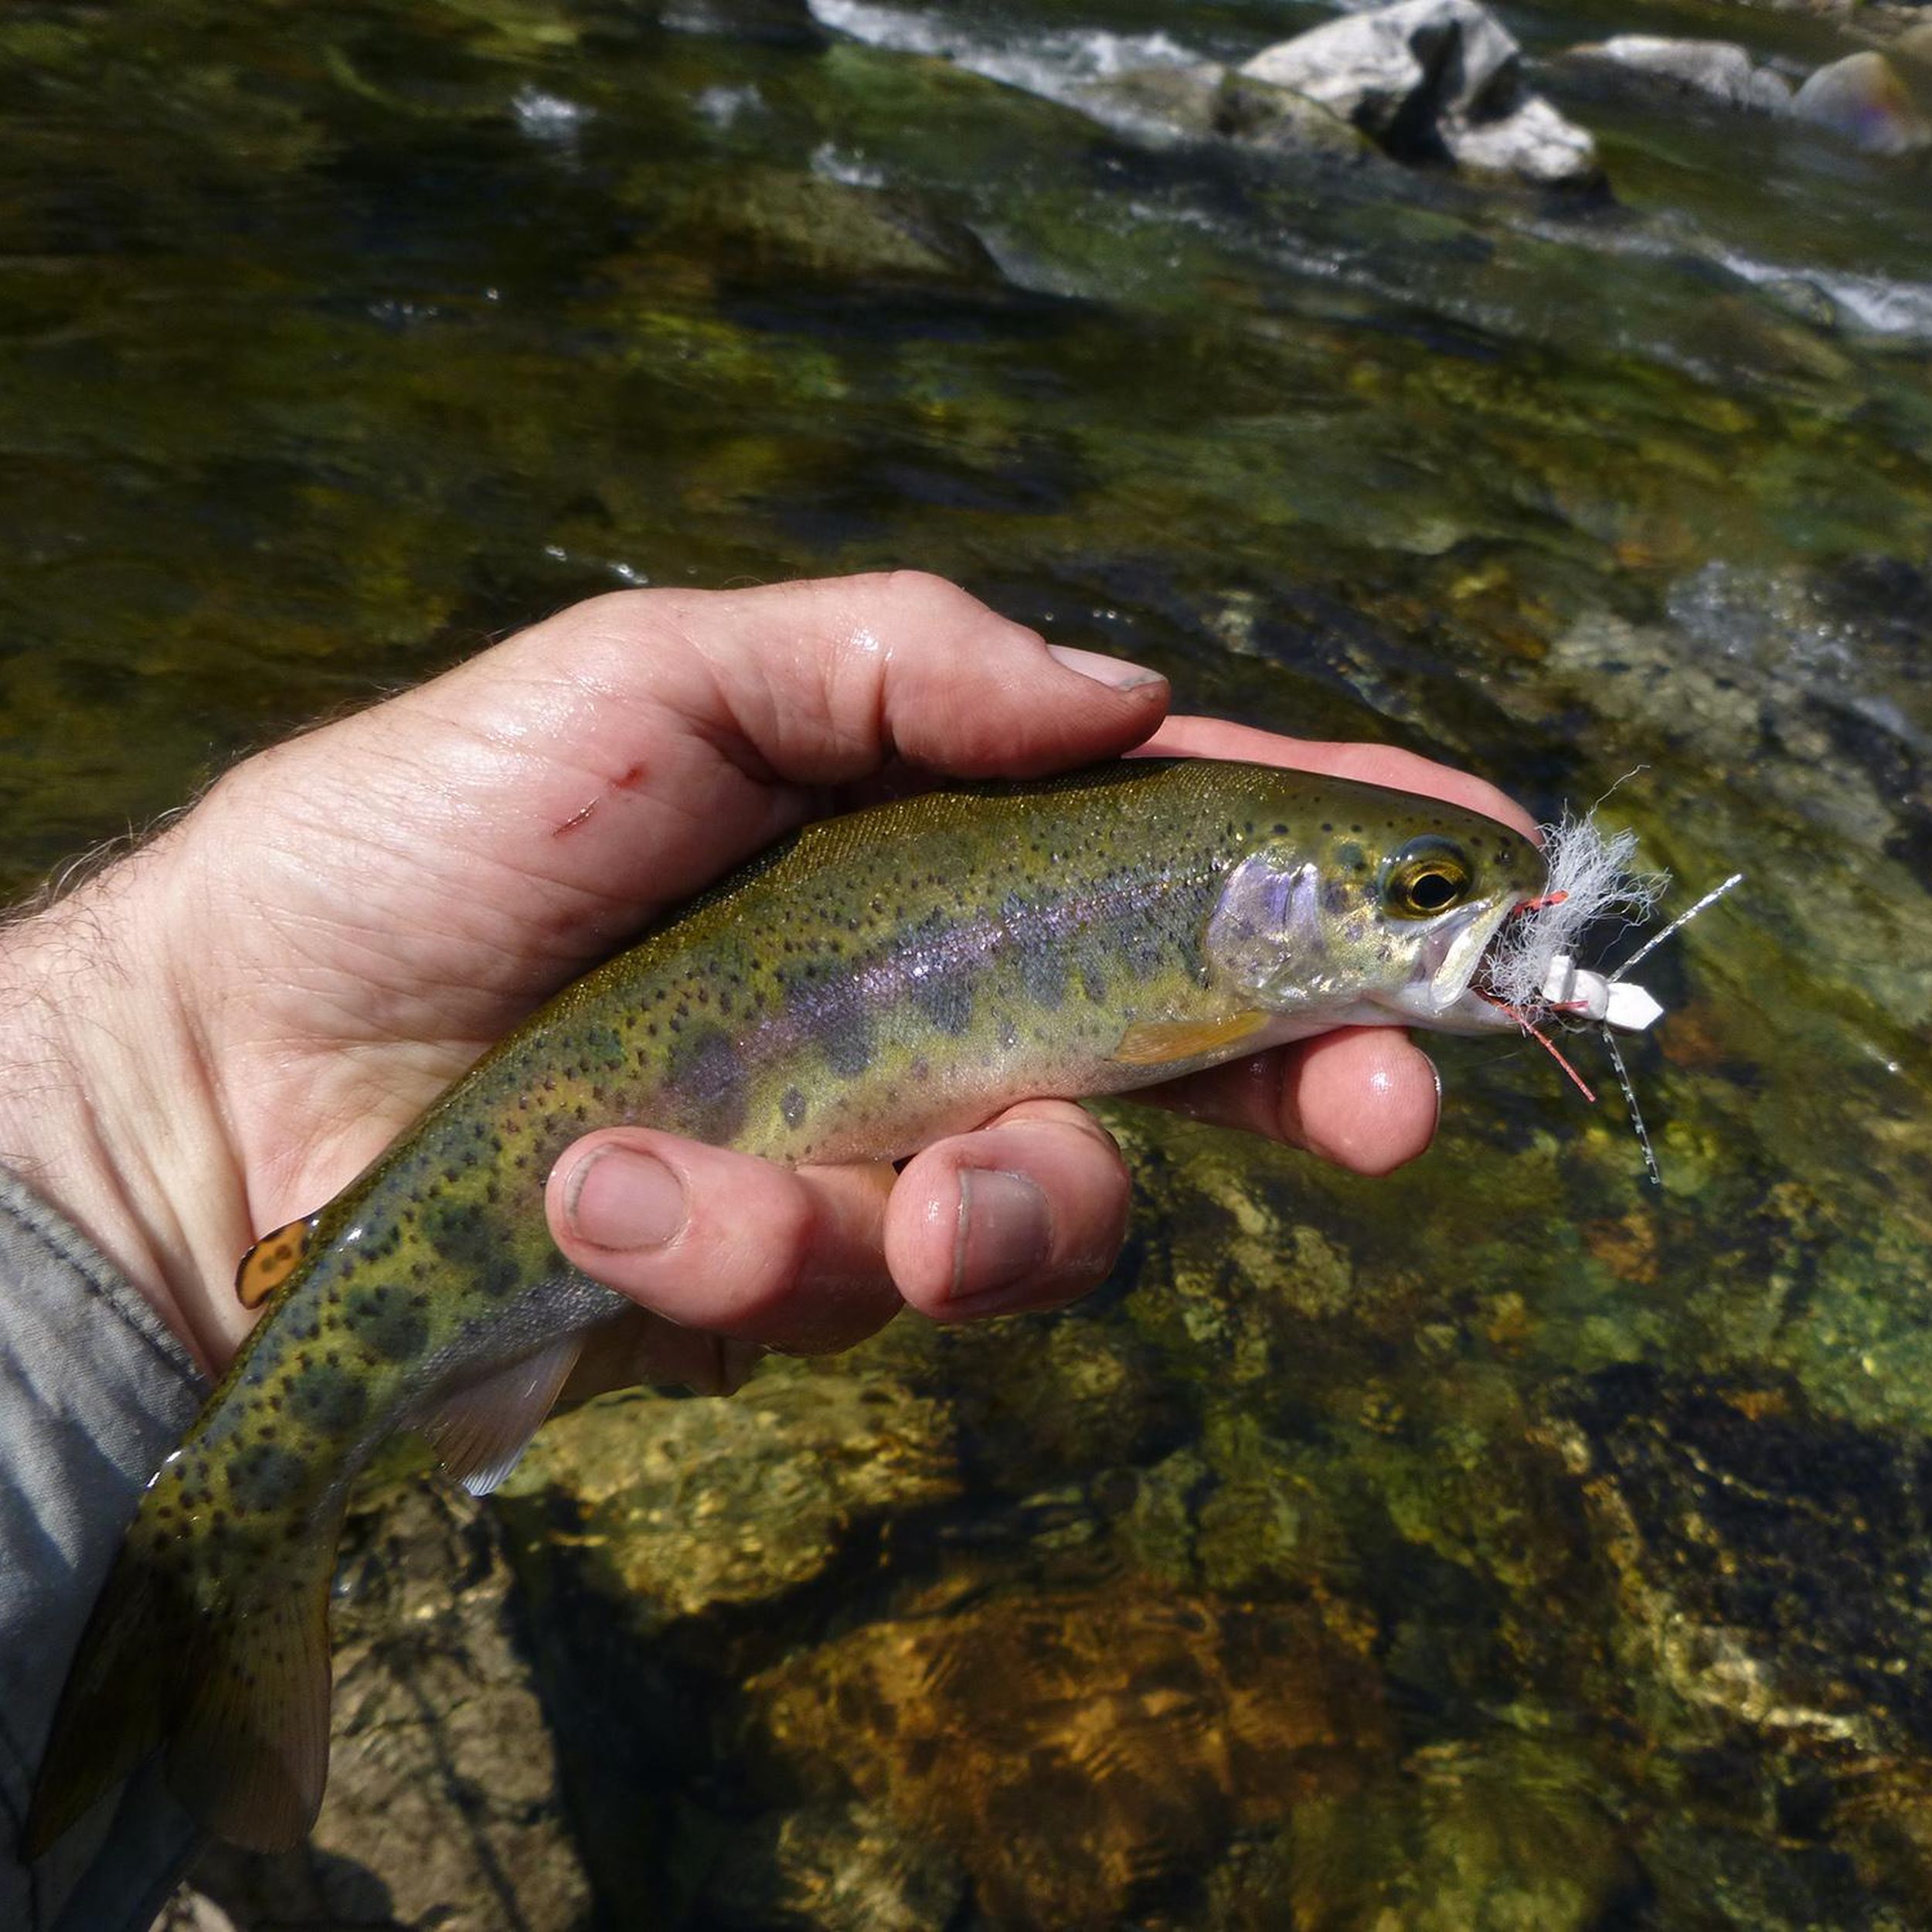 Small rainbows remain mystery to anglers, biologists